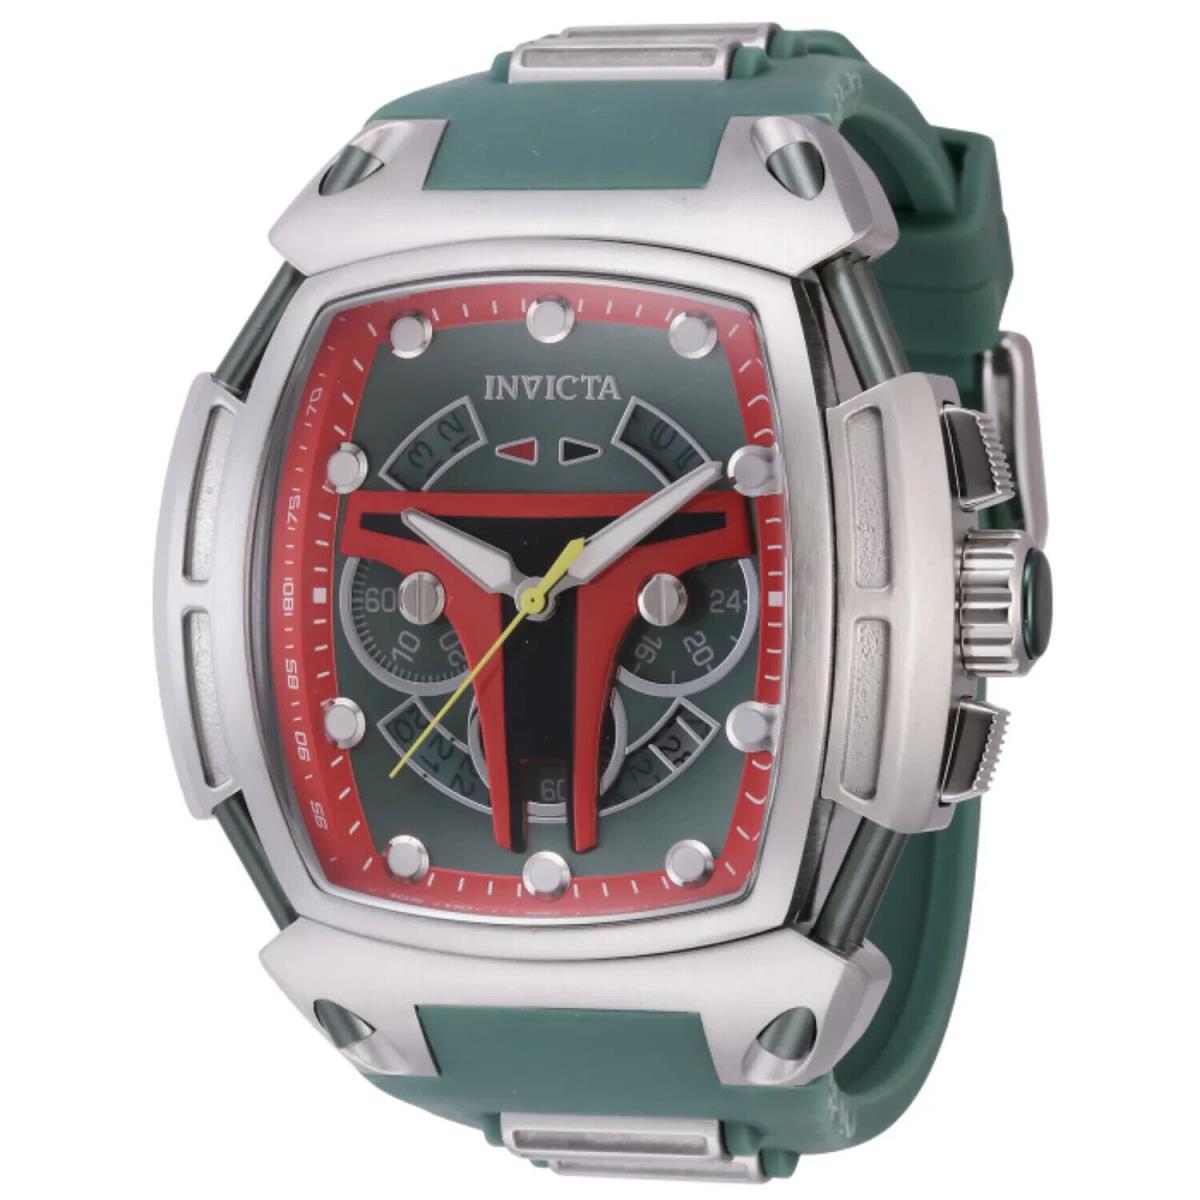 Invicta watch Diablo - Dial: Green and Red and Black, Band: